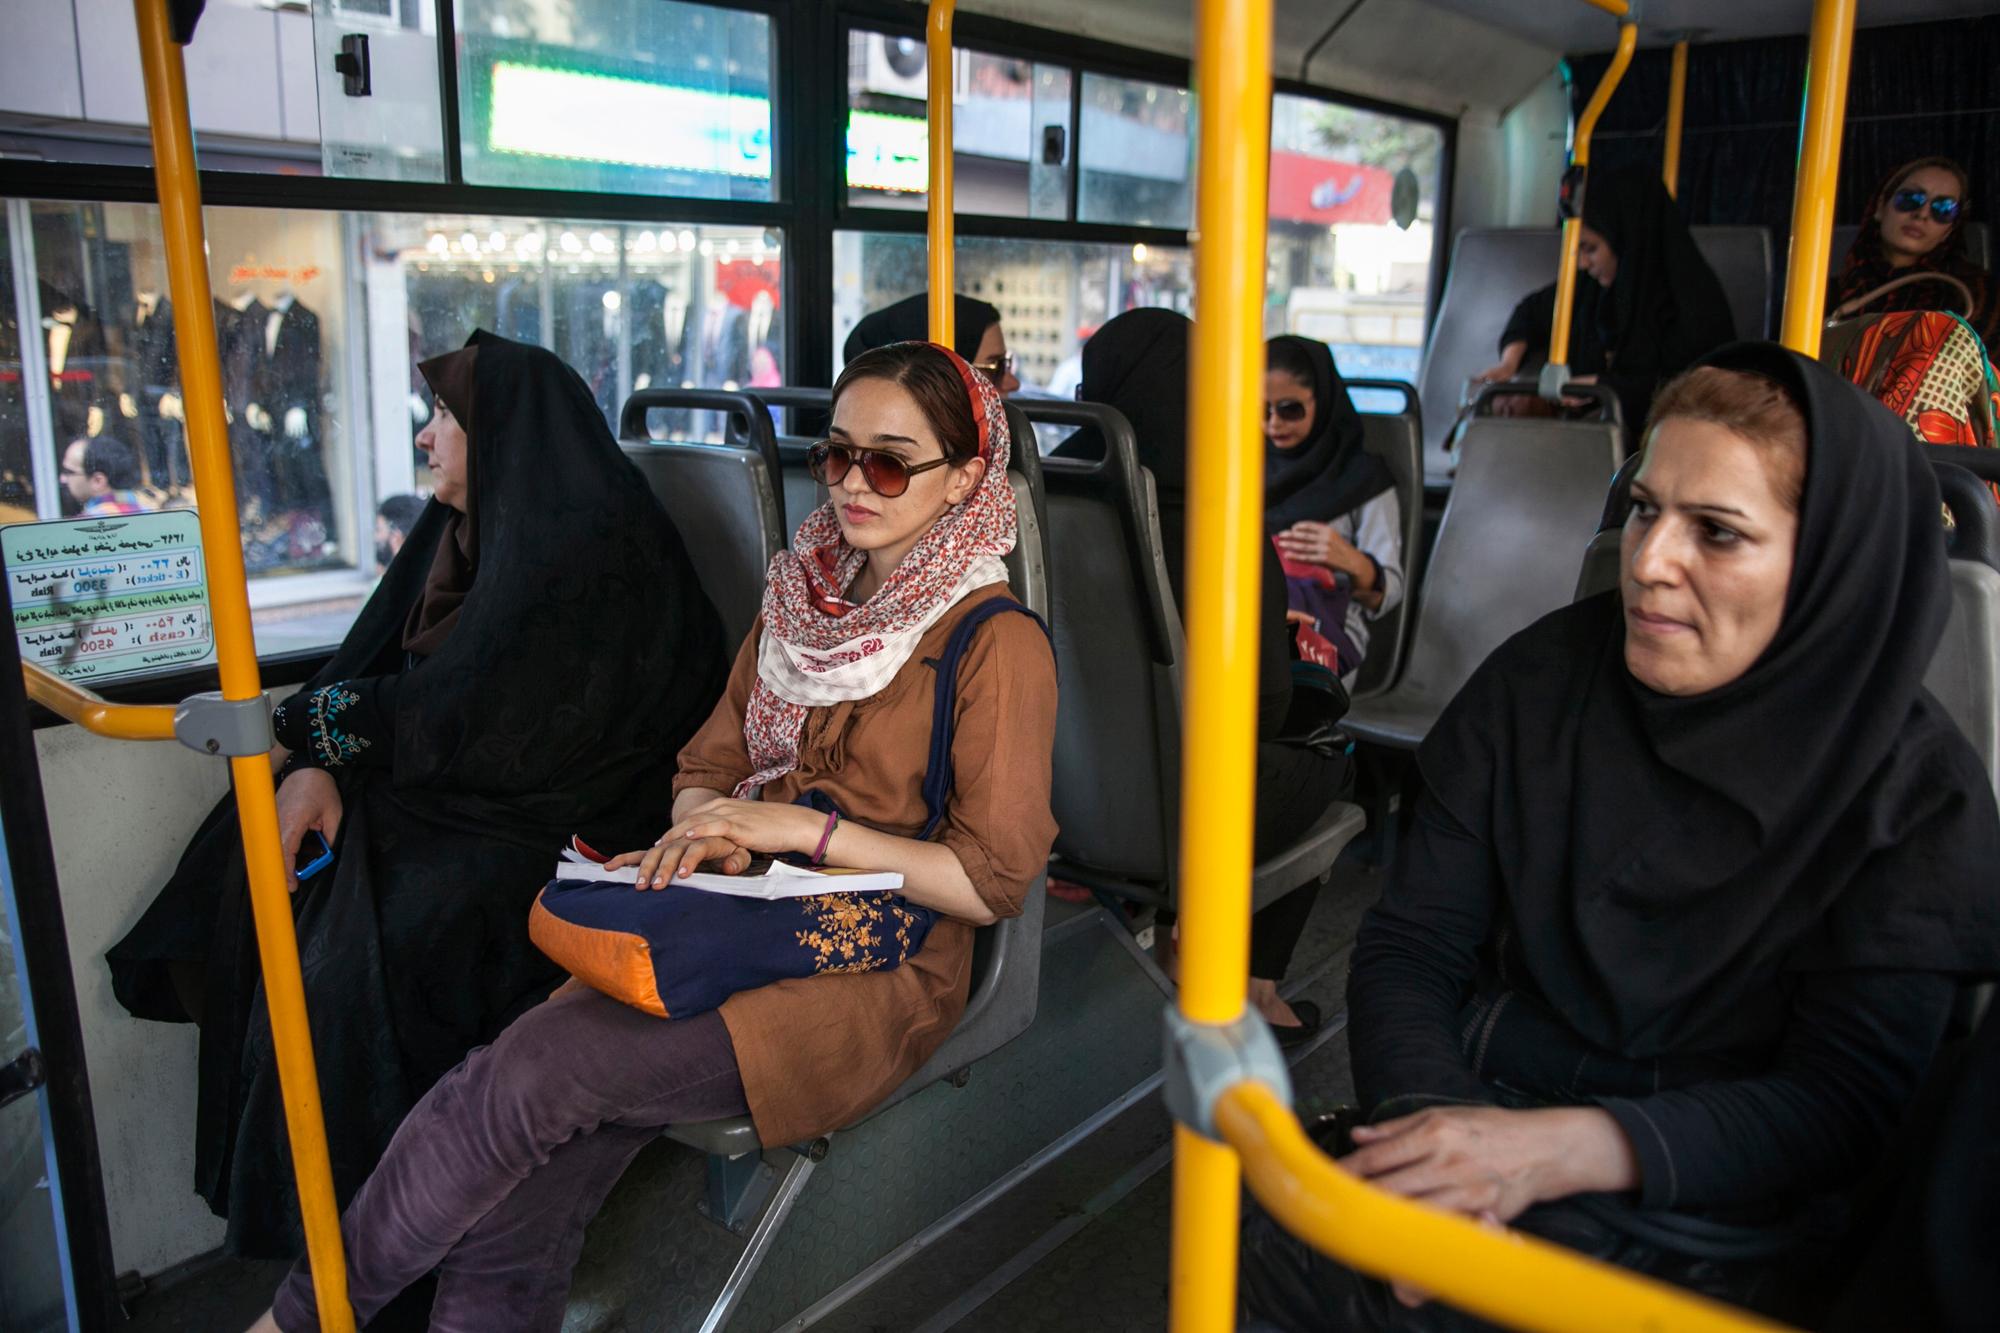 Tehran : the faces of freedom - Mahsa has a hard time finding her place in this society...